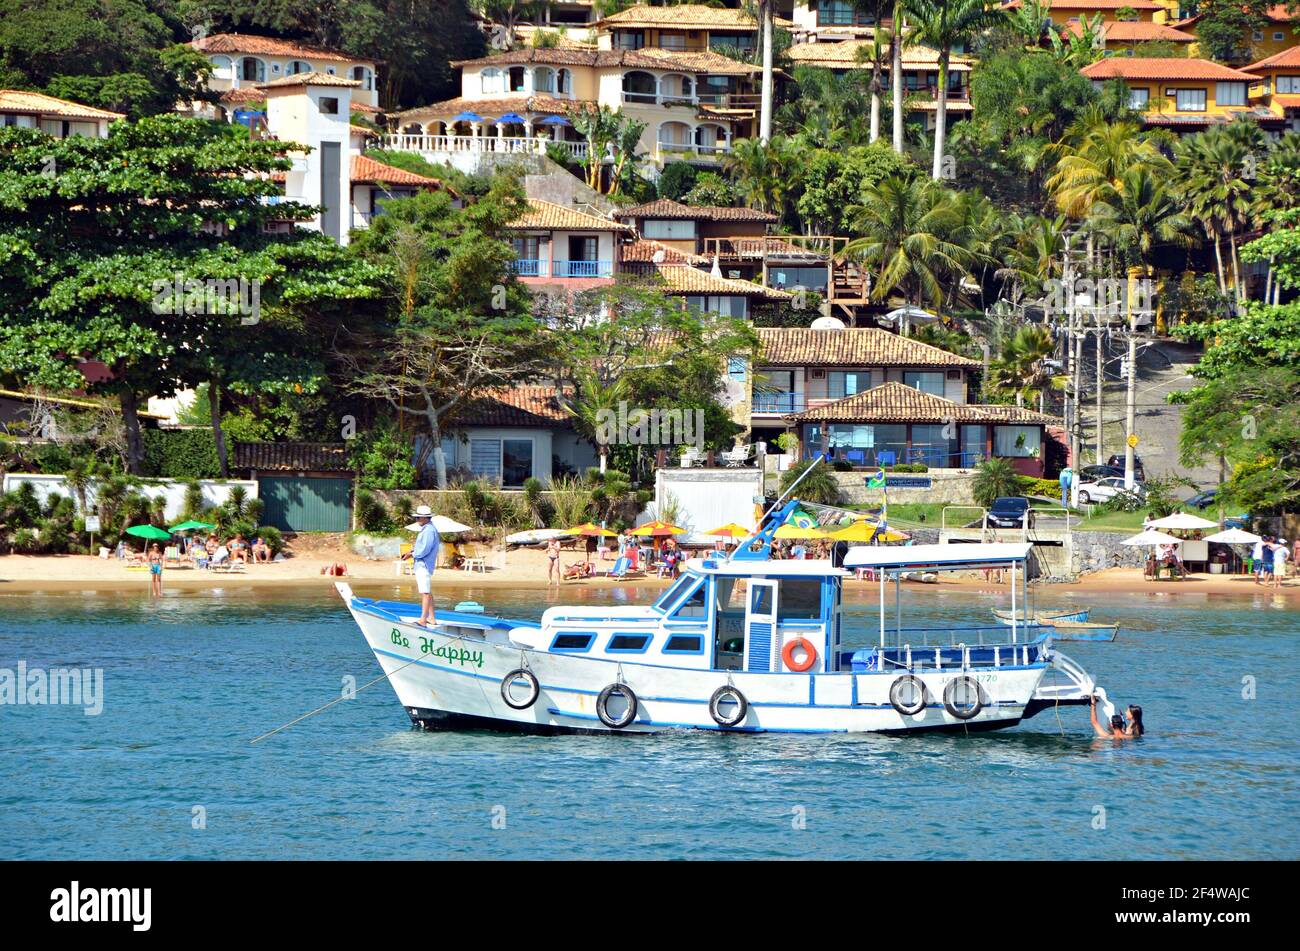 Landscape with view of a traditional sightseeing tour boat on the waters of Armação dos Búzios, the renown resort town of Rio de Janeiro, Brazil. Stock Photo